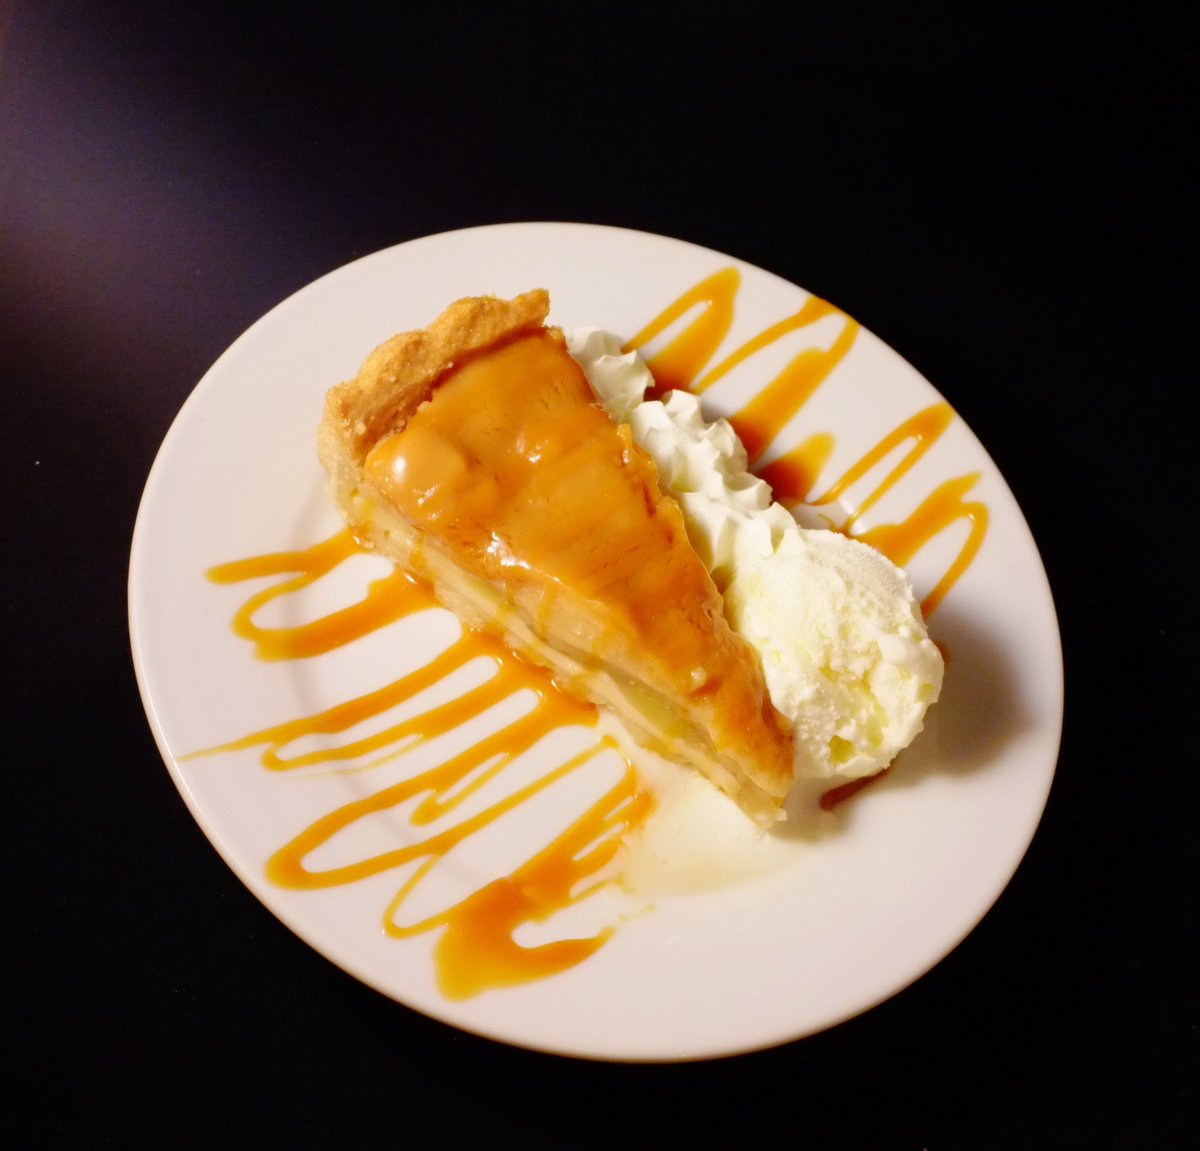 What are your plans for #dessert ? 
#caramelapplepie